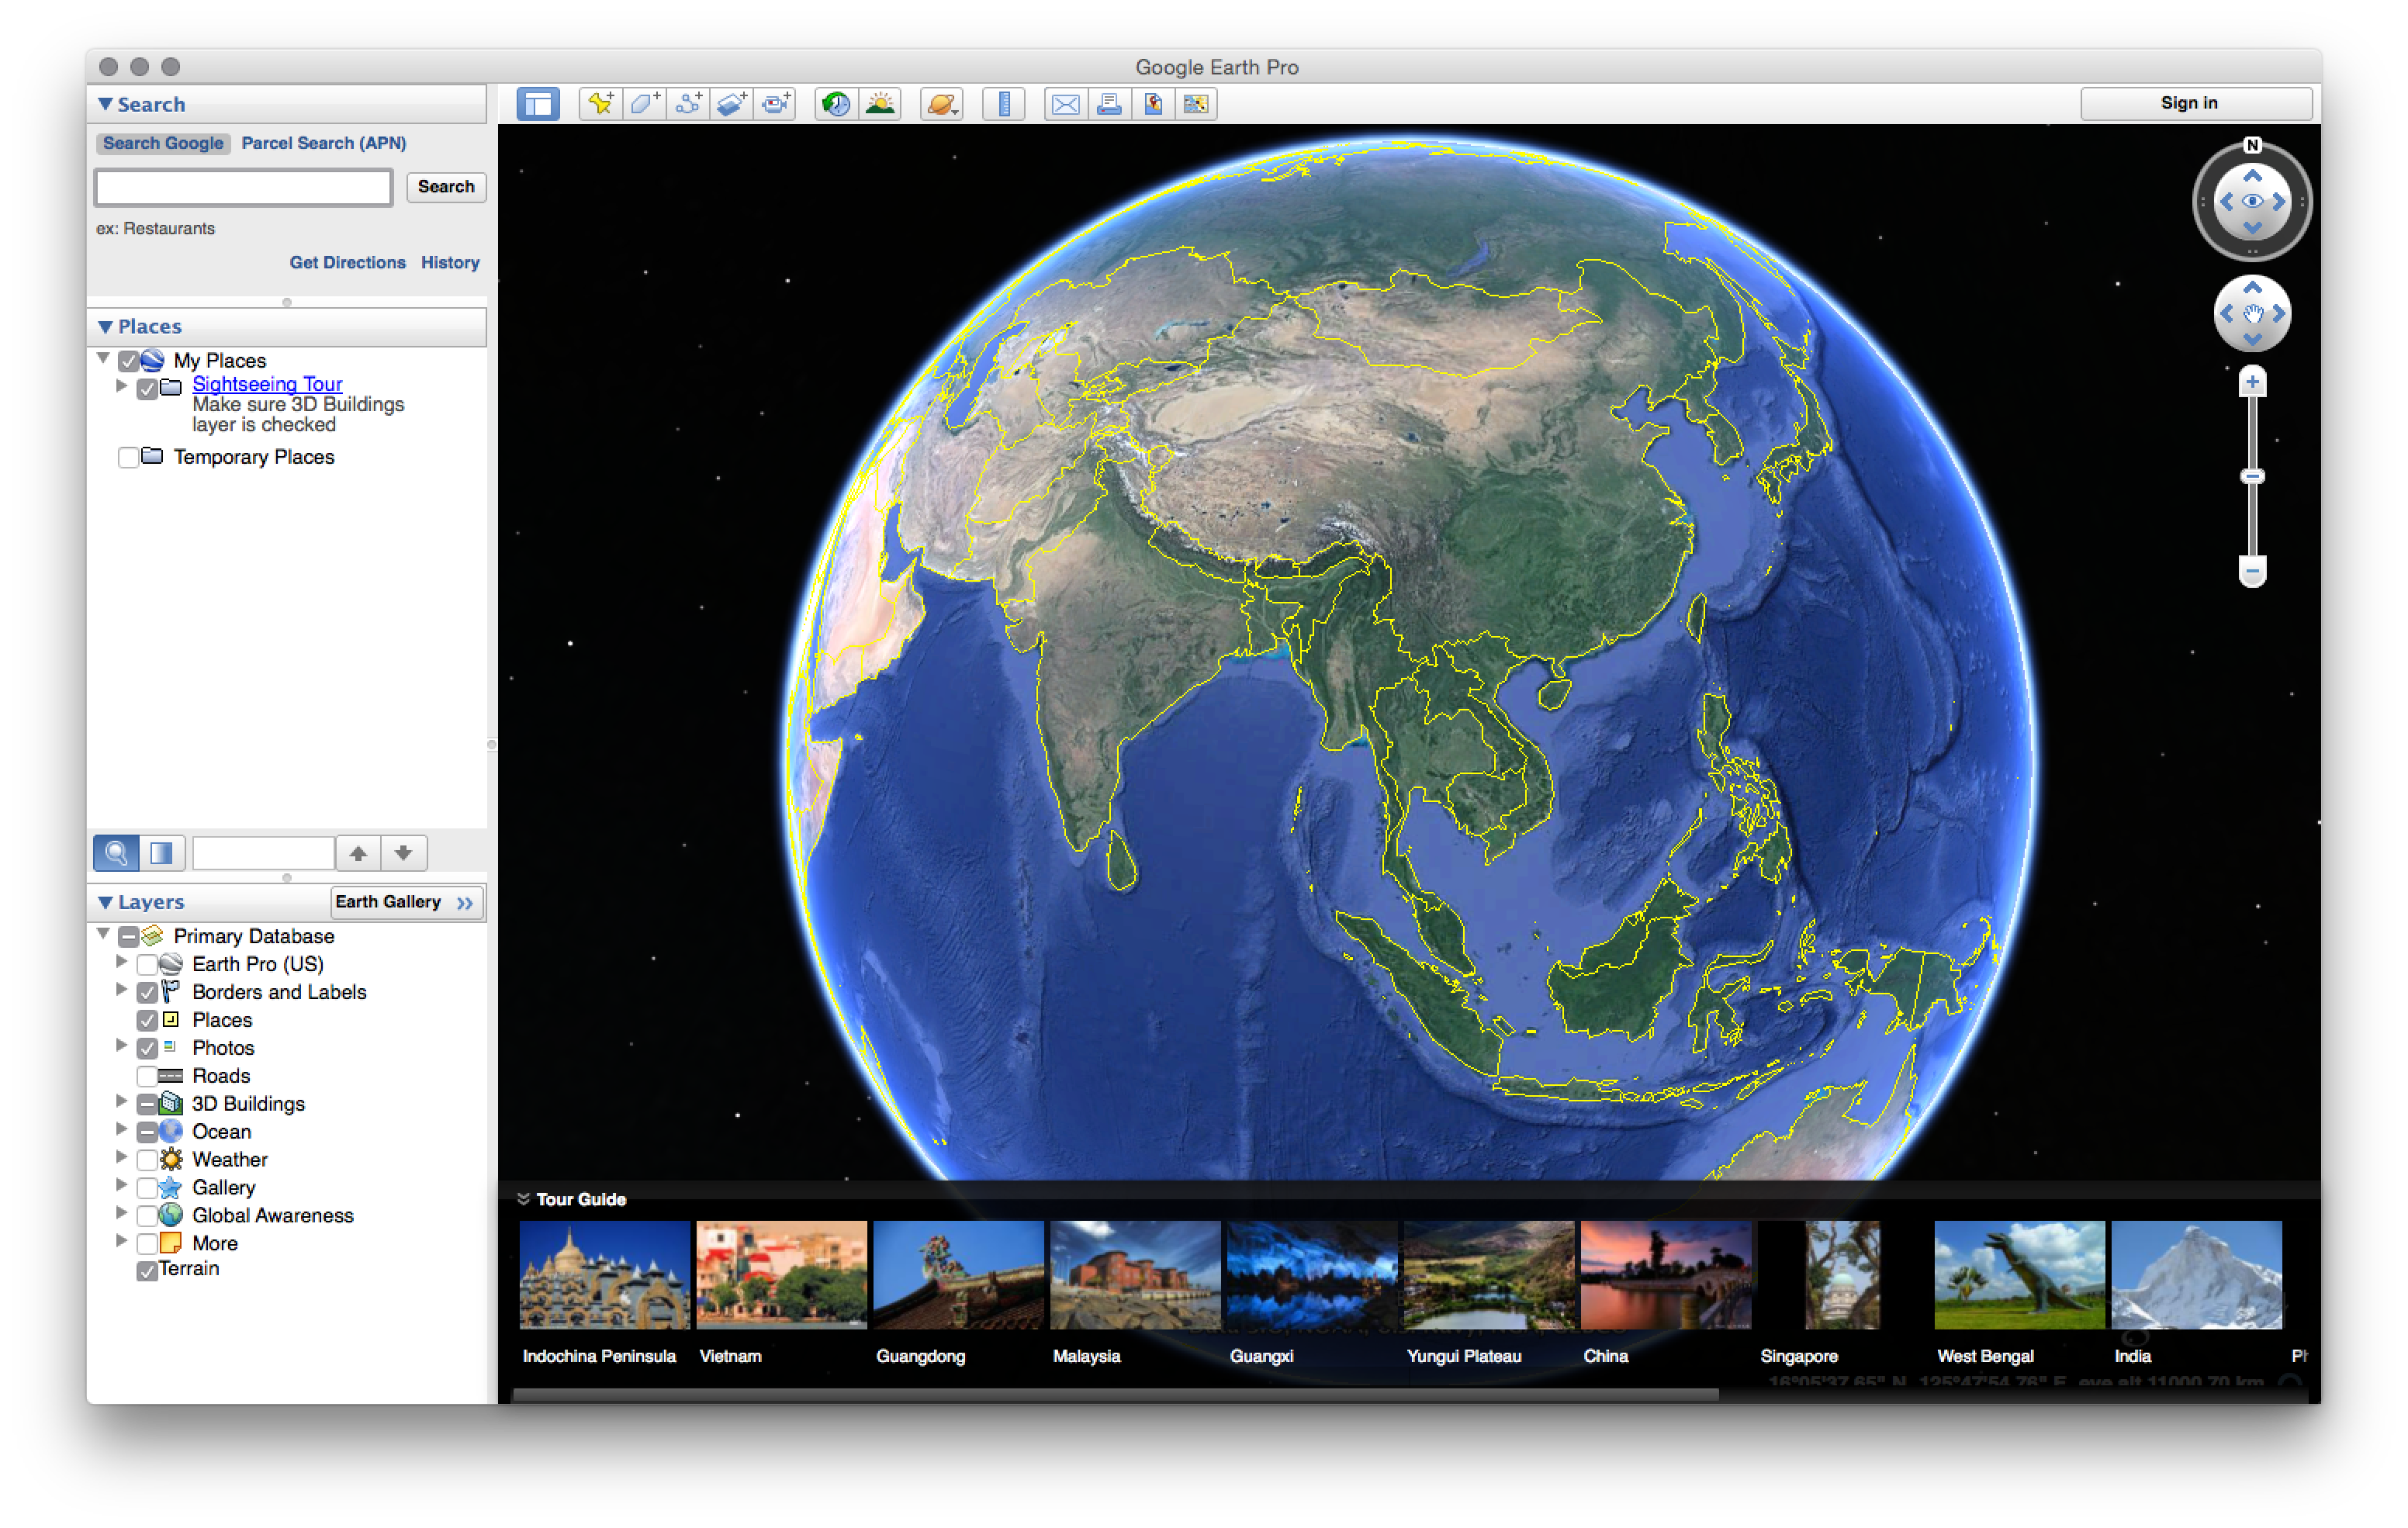 download google earth pro for windows 10